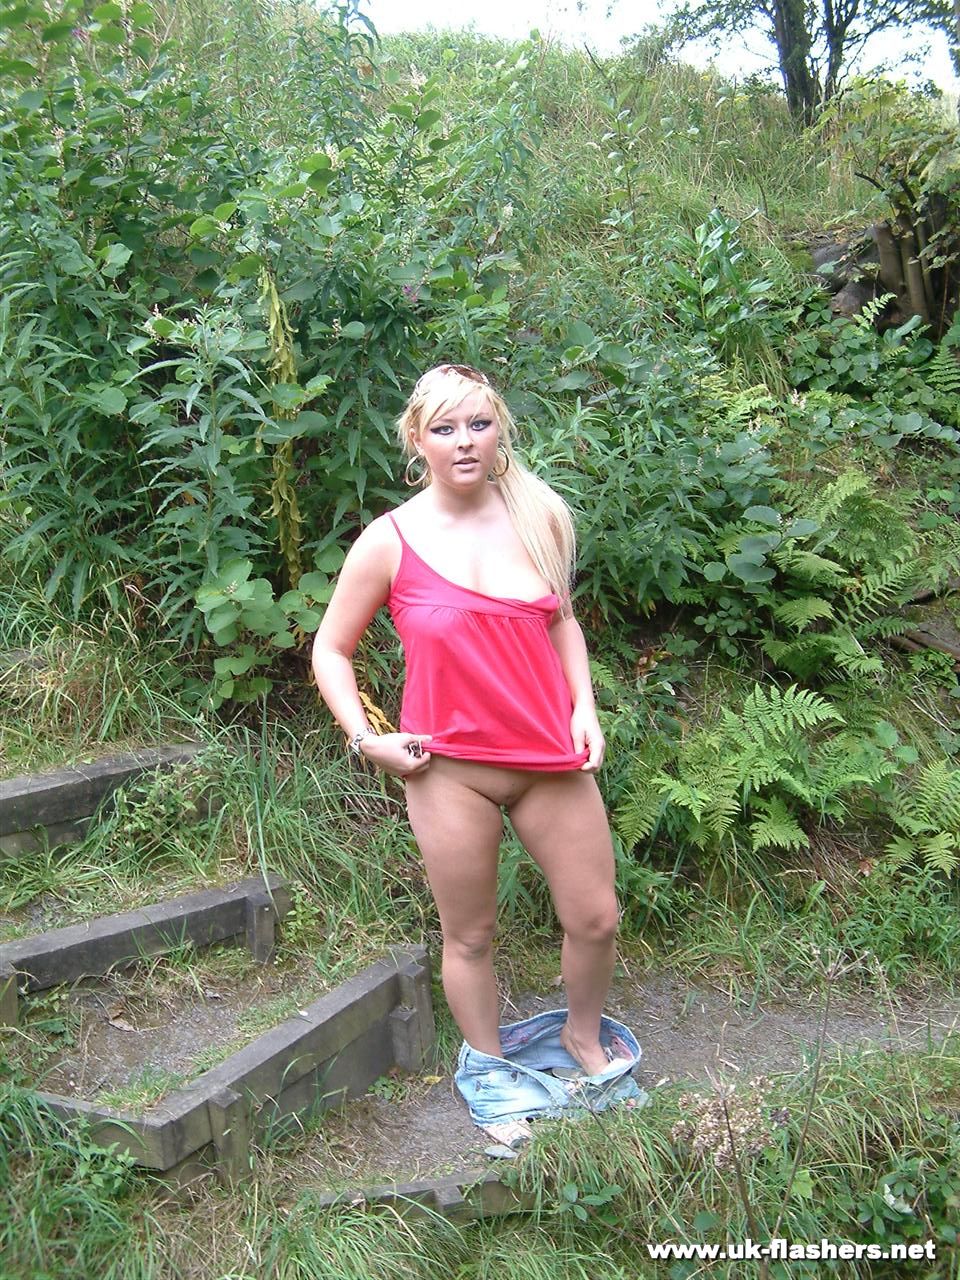 Overweight UK female with blonde hair strips naked on a popular walking trails porno fotoğrafı #428197332 | UK Flashers Pics, Lena Leigh, Public, mobil porno